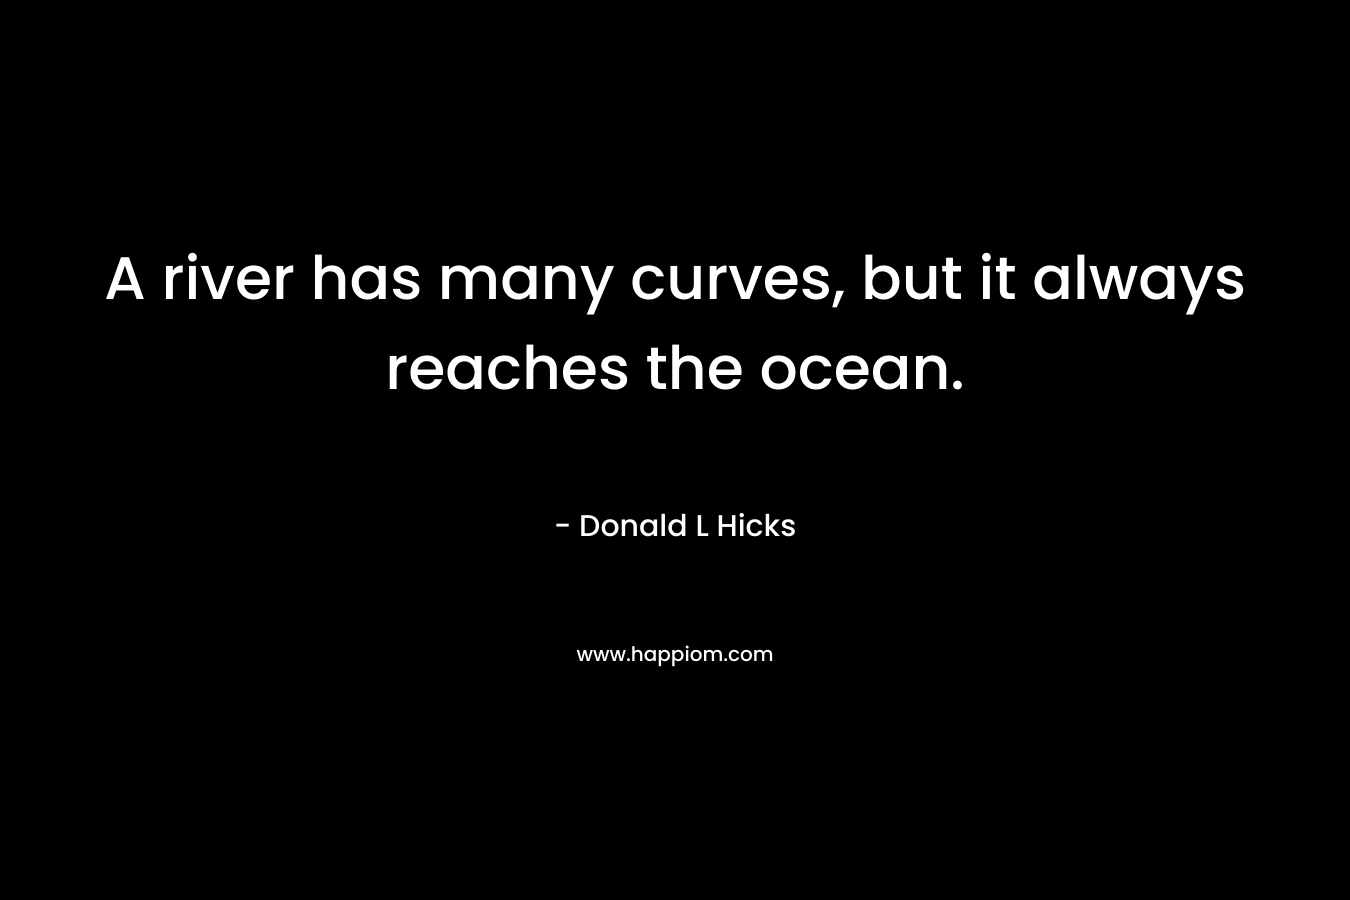 A river has many curves, but it always reaches the ocean.